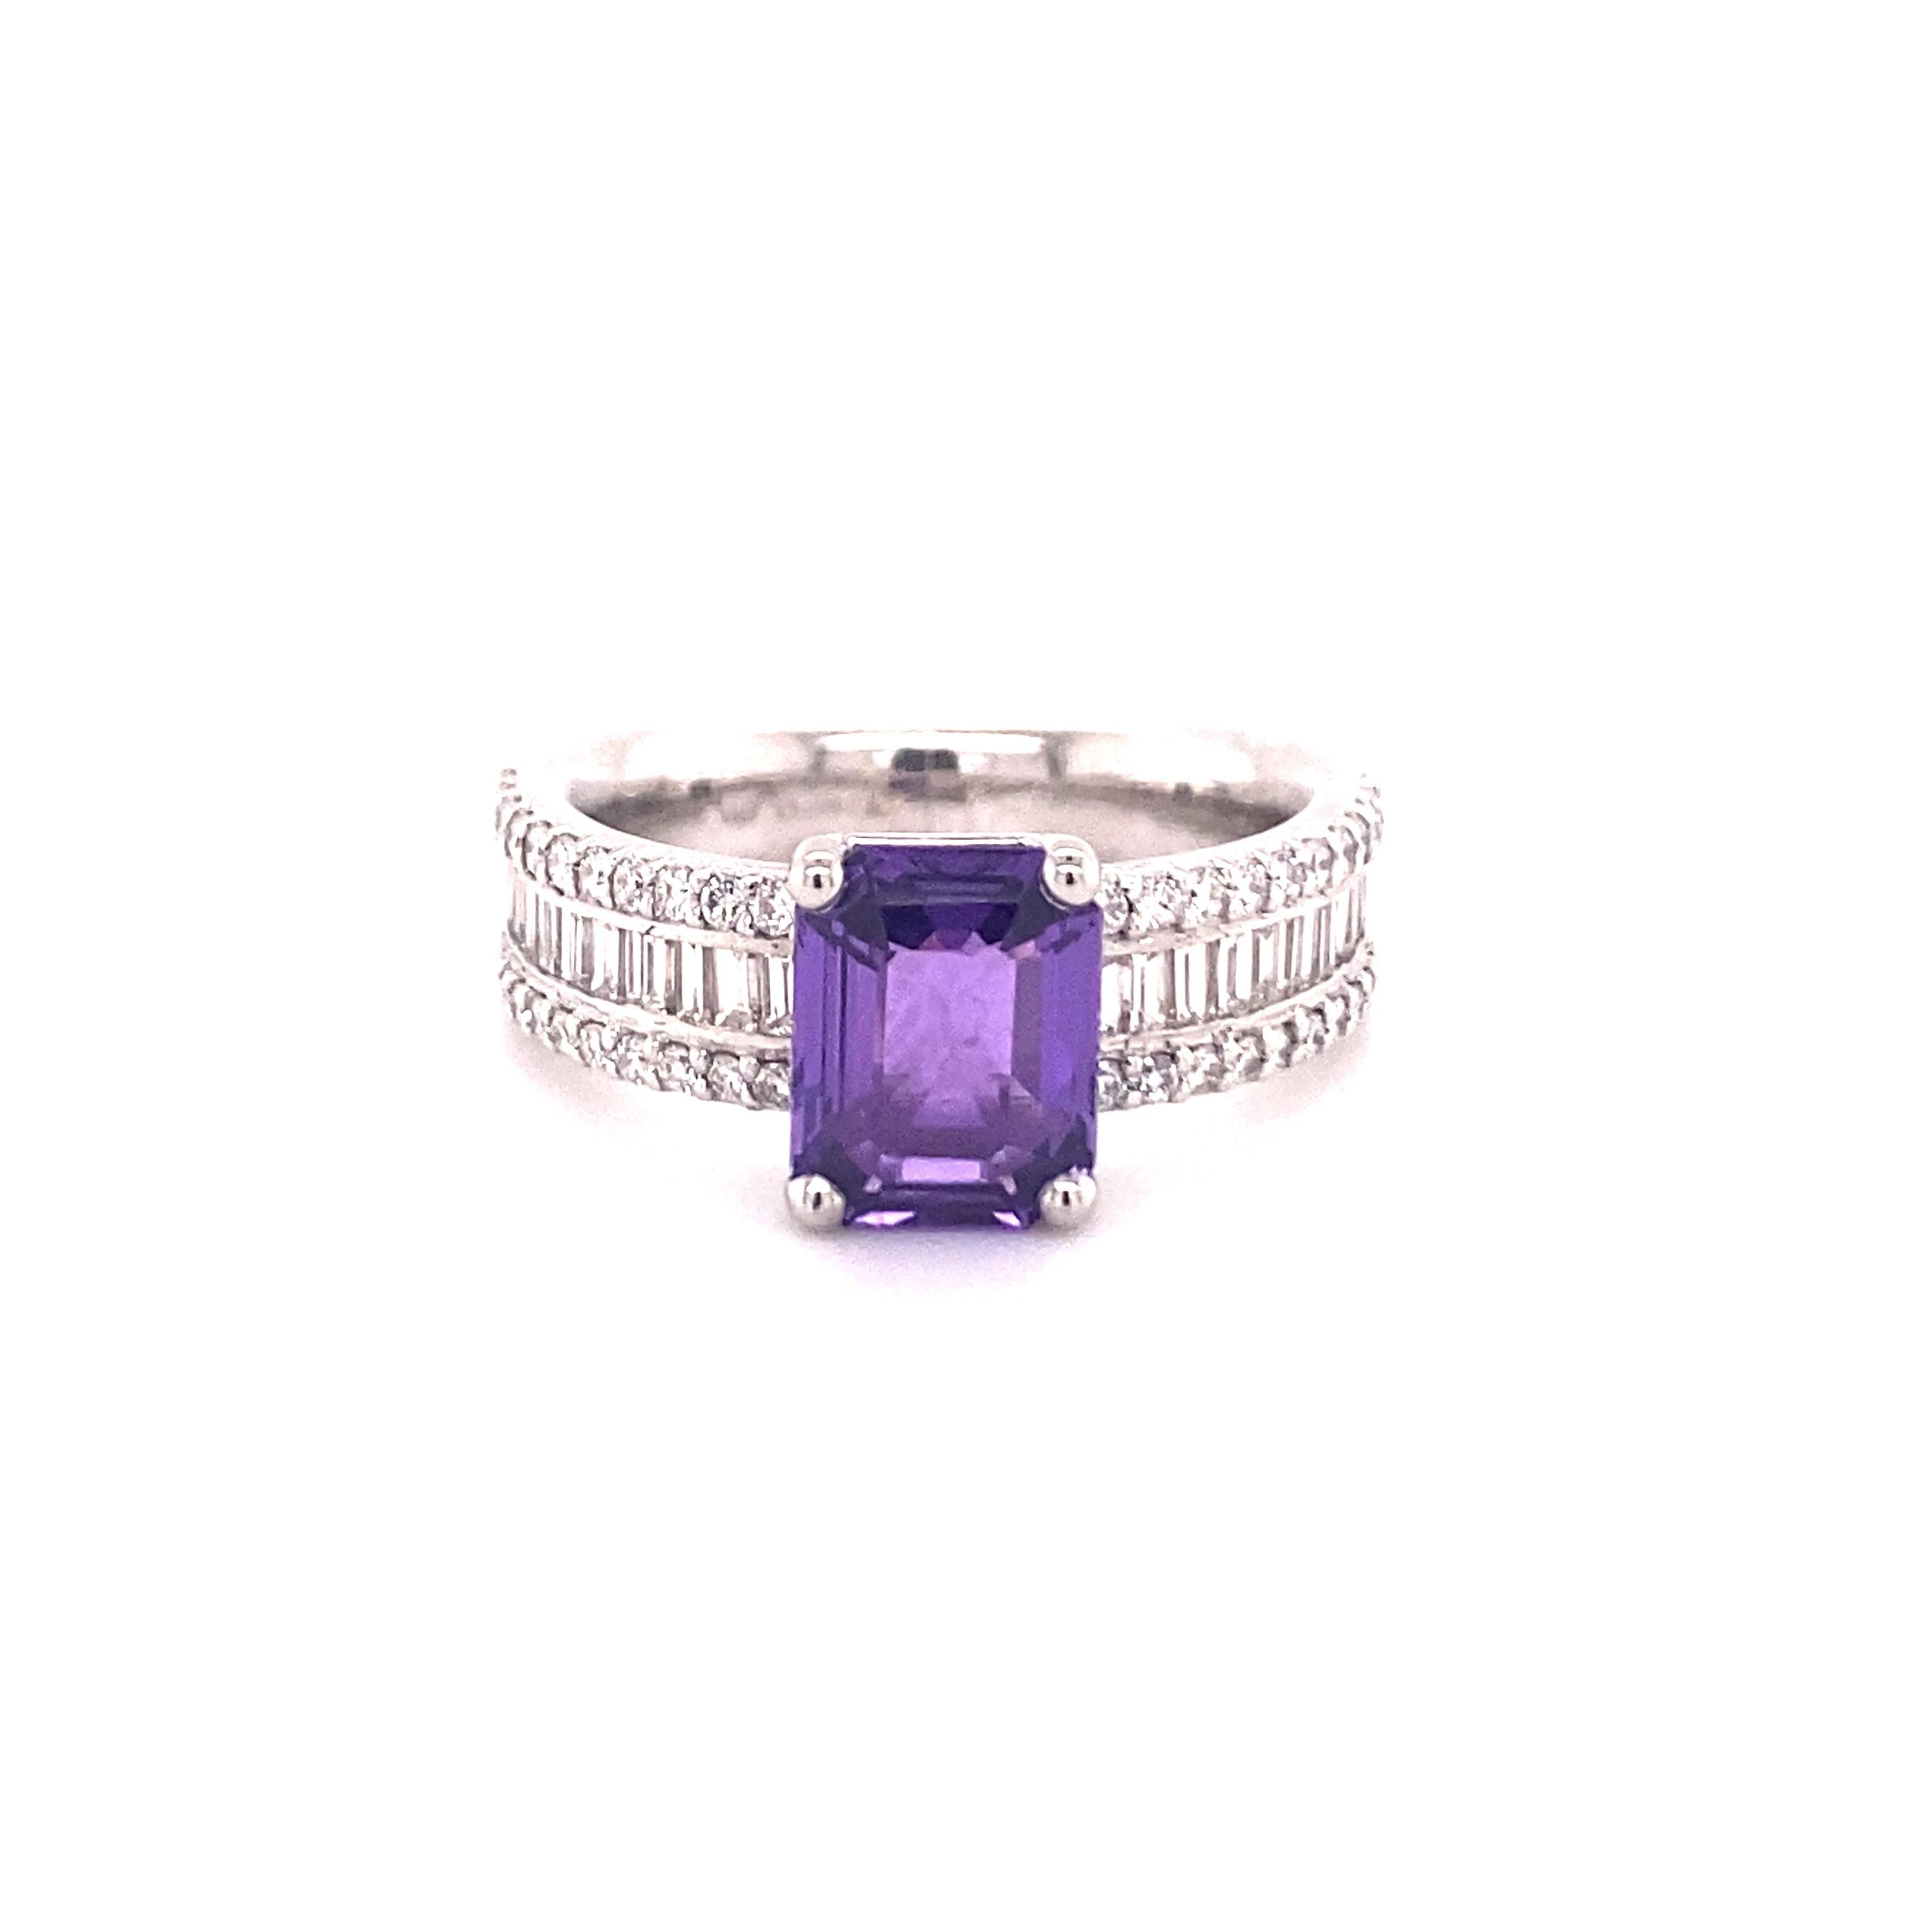 A beautiful untreated purple sapphire weighing 2.29 ct is set in this Platinum 950 ring.
22 baguette cut diamonds totalling 0.69 ct of G/H colour and vs clarity are repeating the rectangular shape. The contrast is made up of 44 brilliants totalling